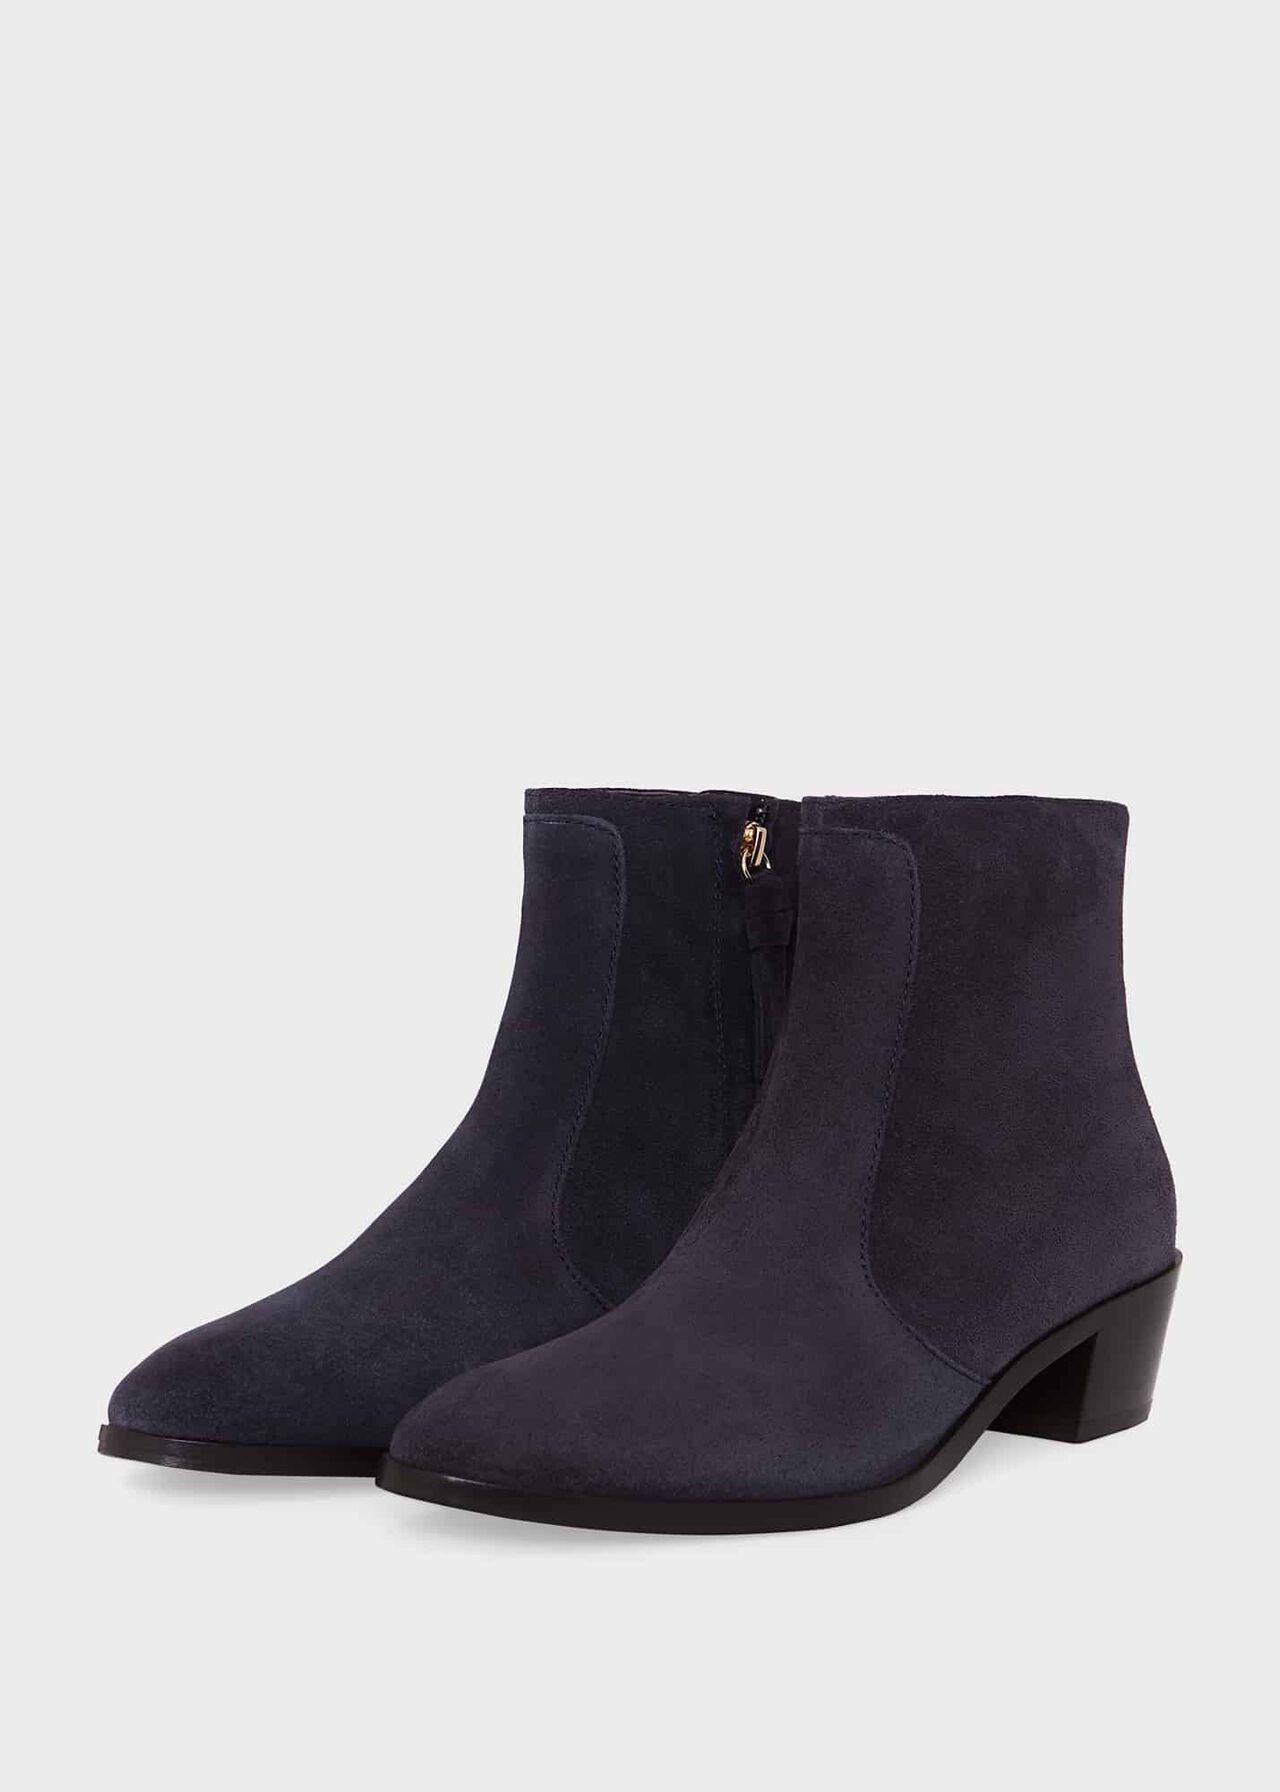 Shona Ankle Boots, Navy, hi-res